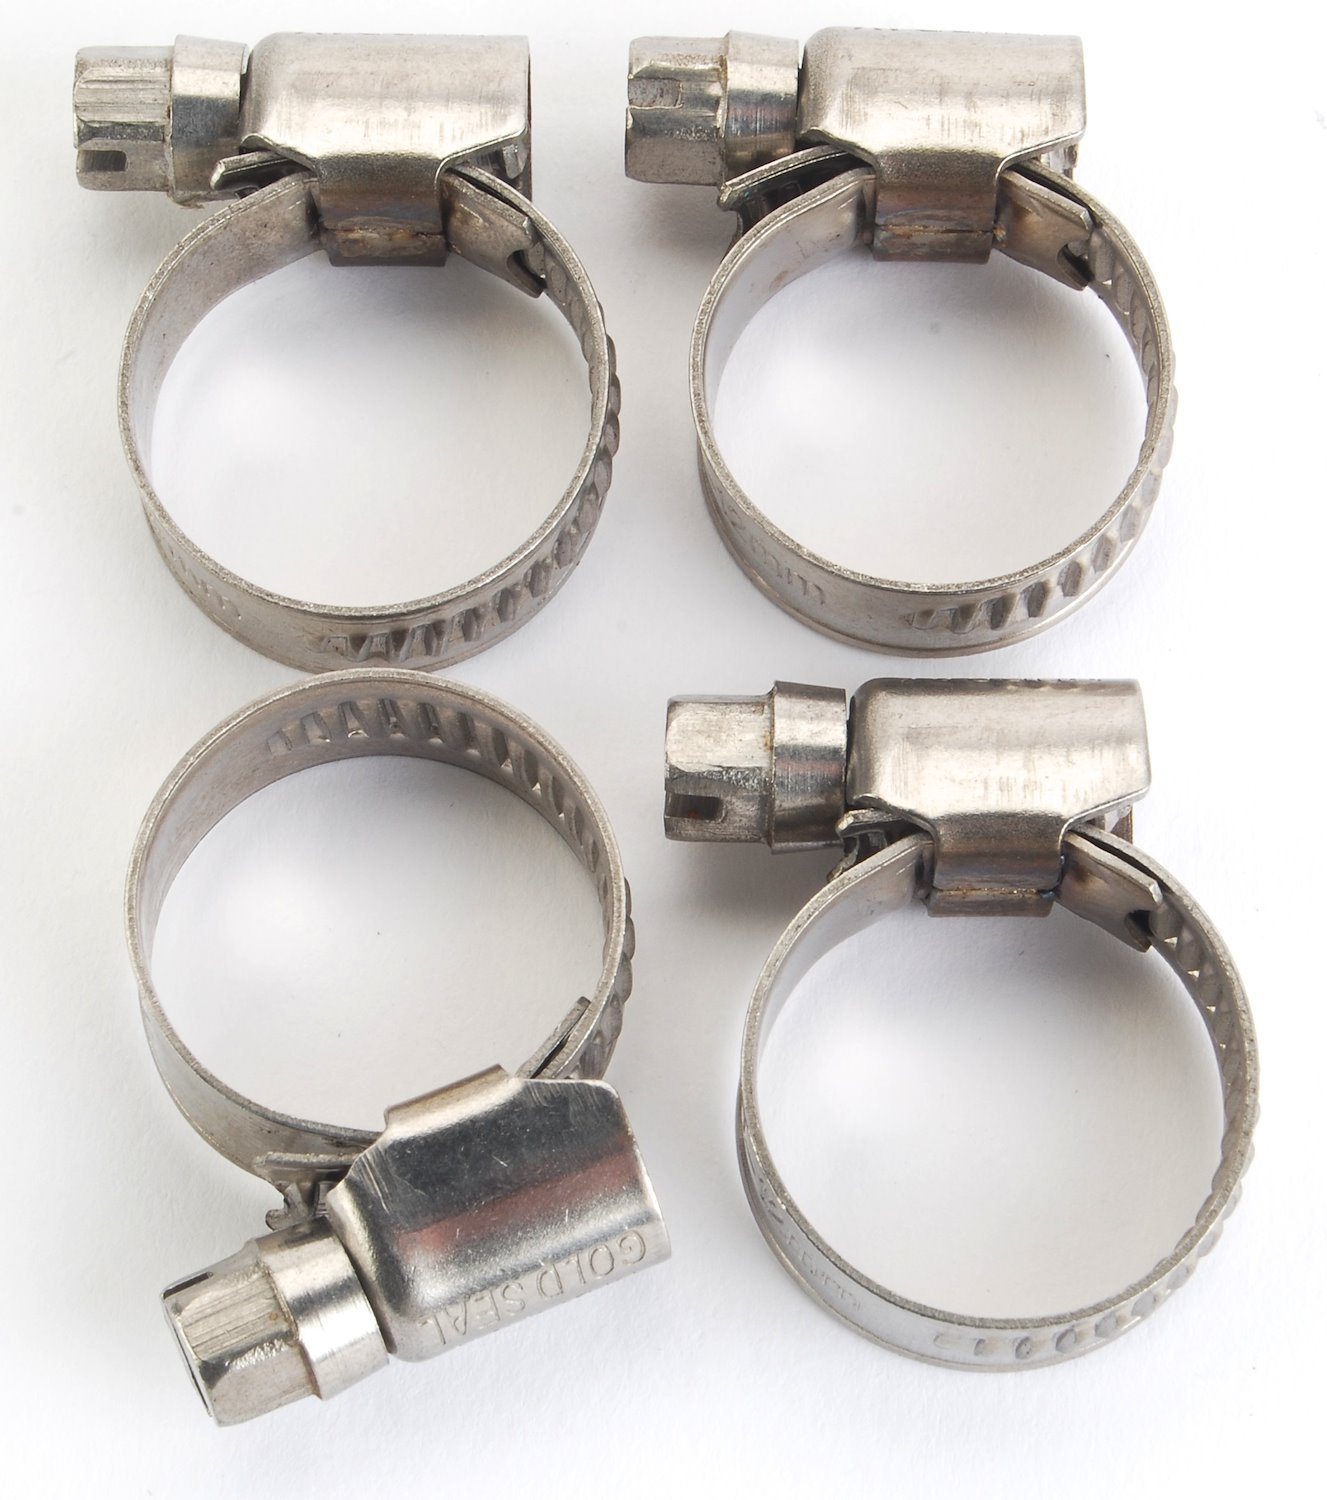 Stainless Steel Hose Clamps 1/2 in. to 7/8 in. OD